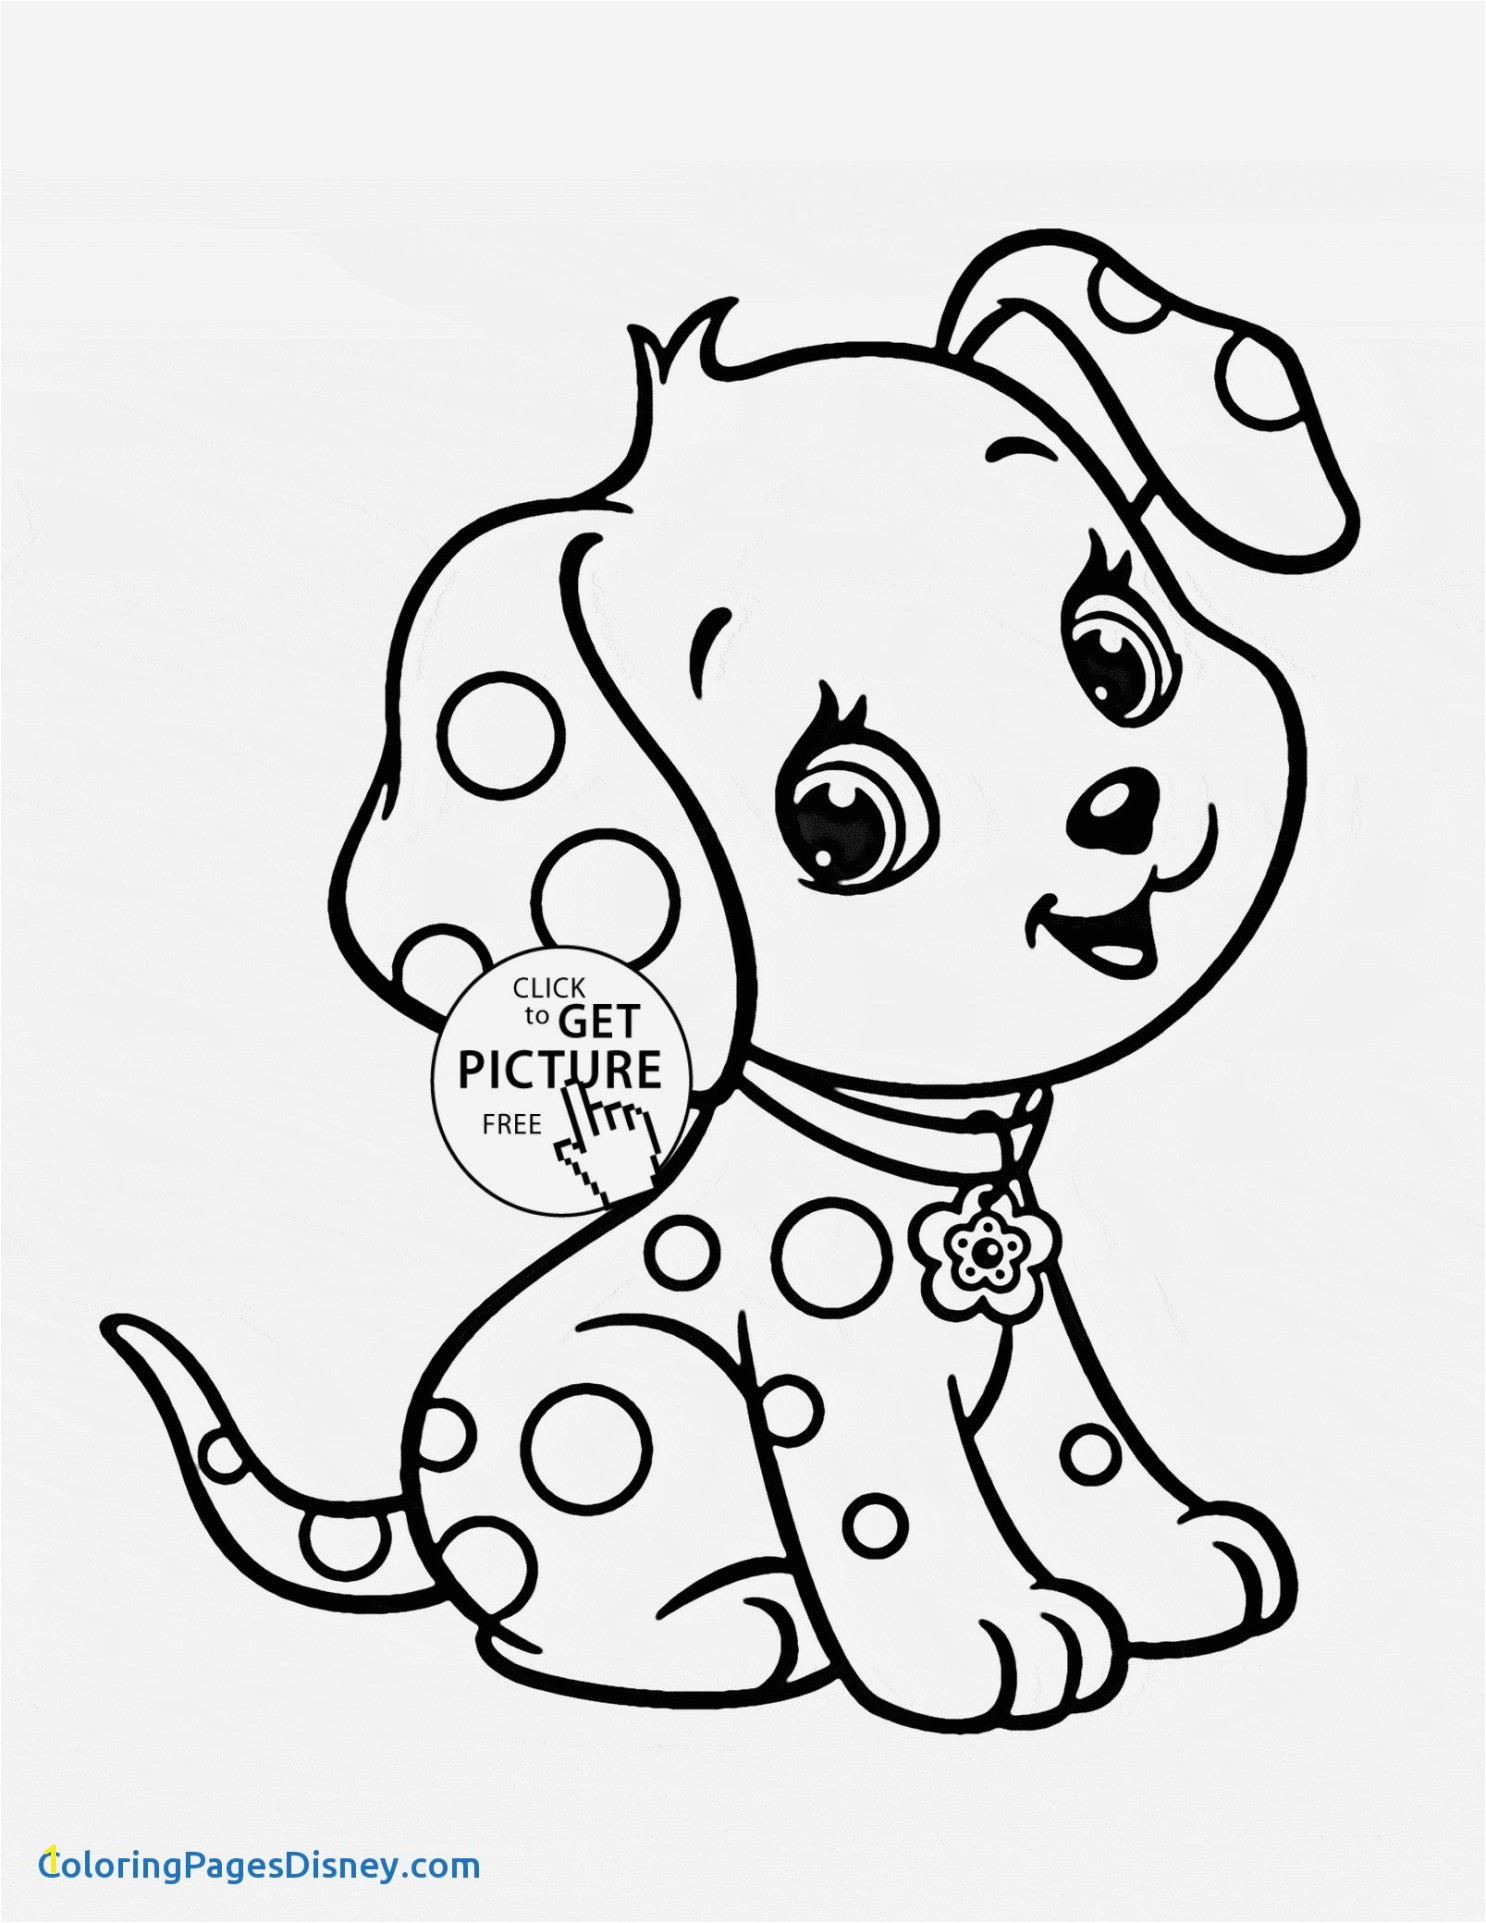 Lab Coloring Pages Lab Coloring Pages New Free Printable Labrador Retriever Coloring